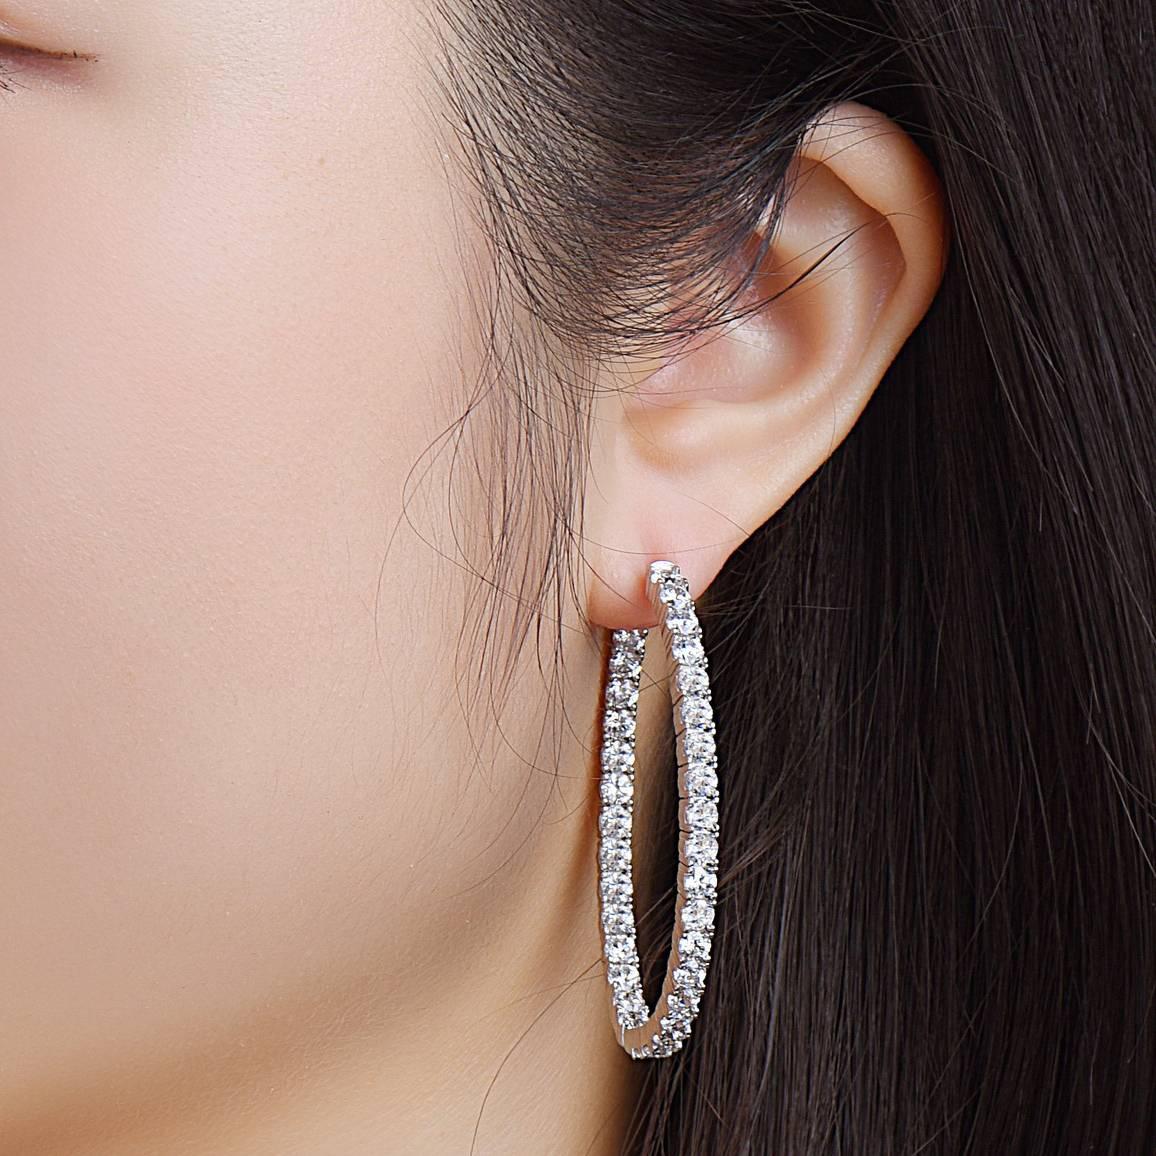 Hand made in the Emilio Jewelry Atelier, Also known as the king of diamond hoops, this Oval shaped inside out diamond hoop earrings set with round diamonds.Our  push locking mechanism is to ensure you never lose this precious earring! 
Approx total